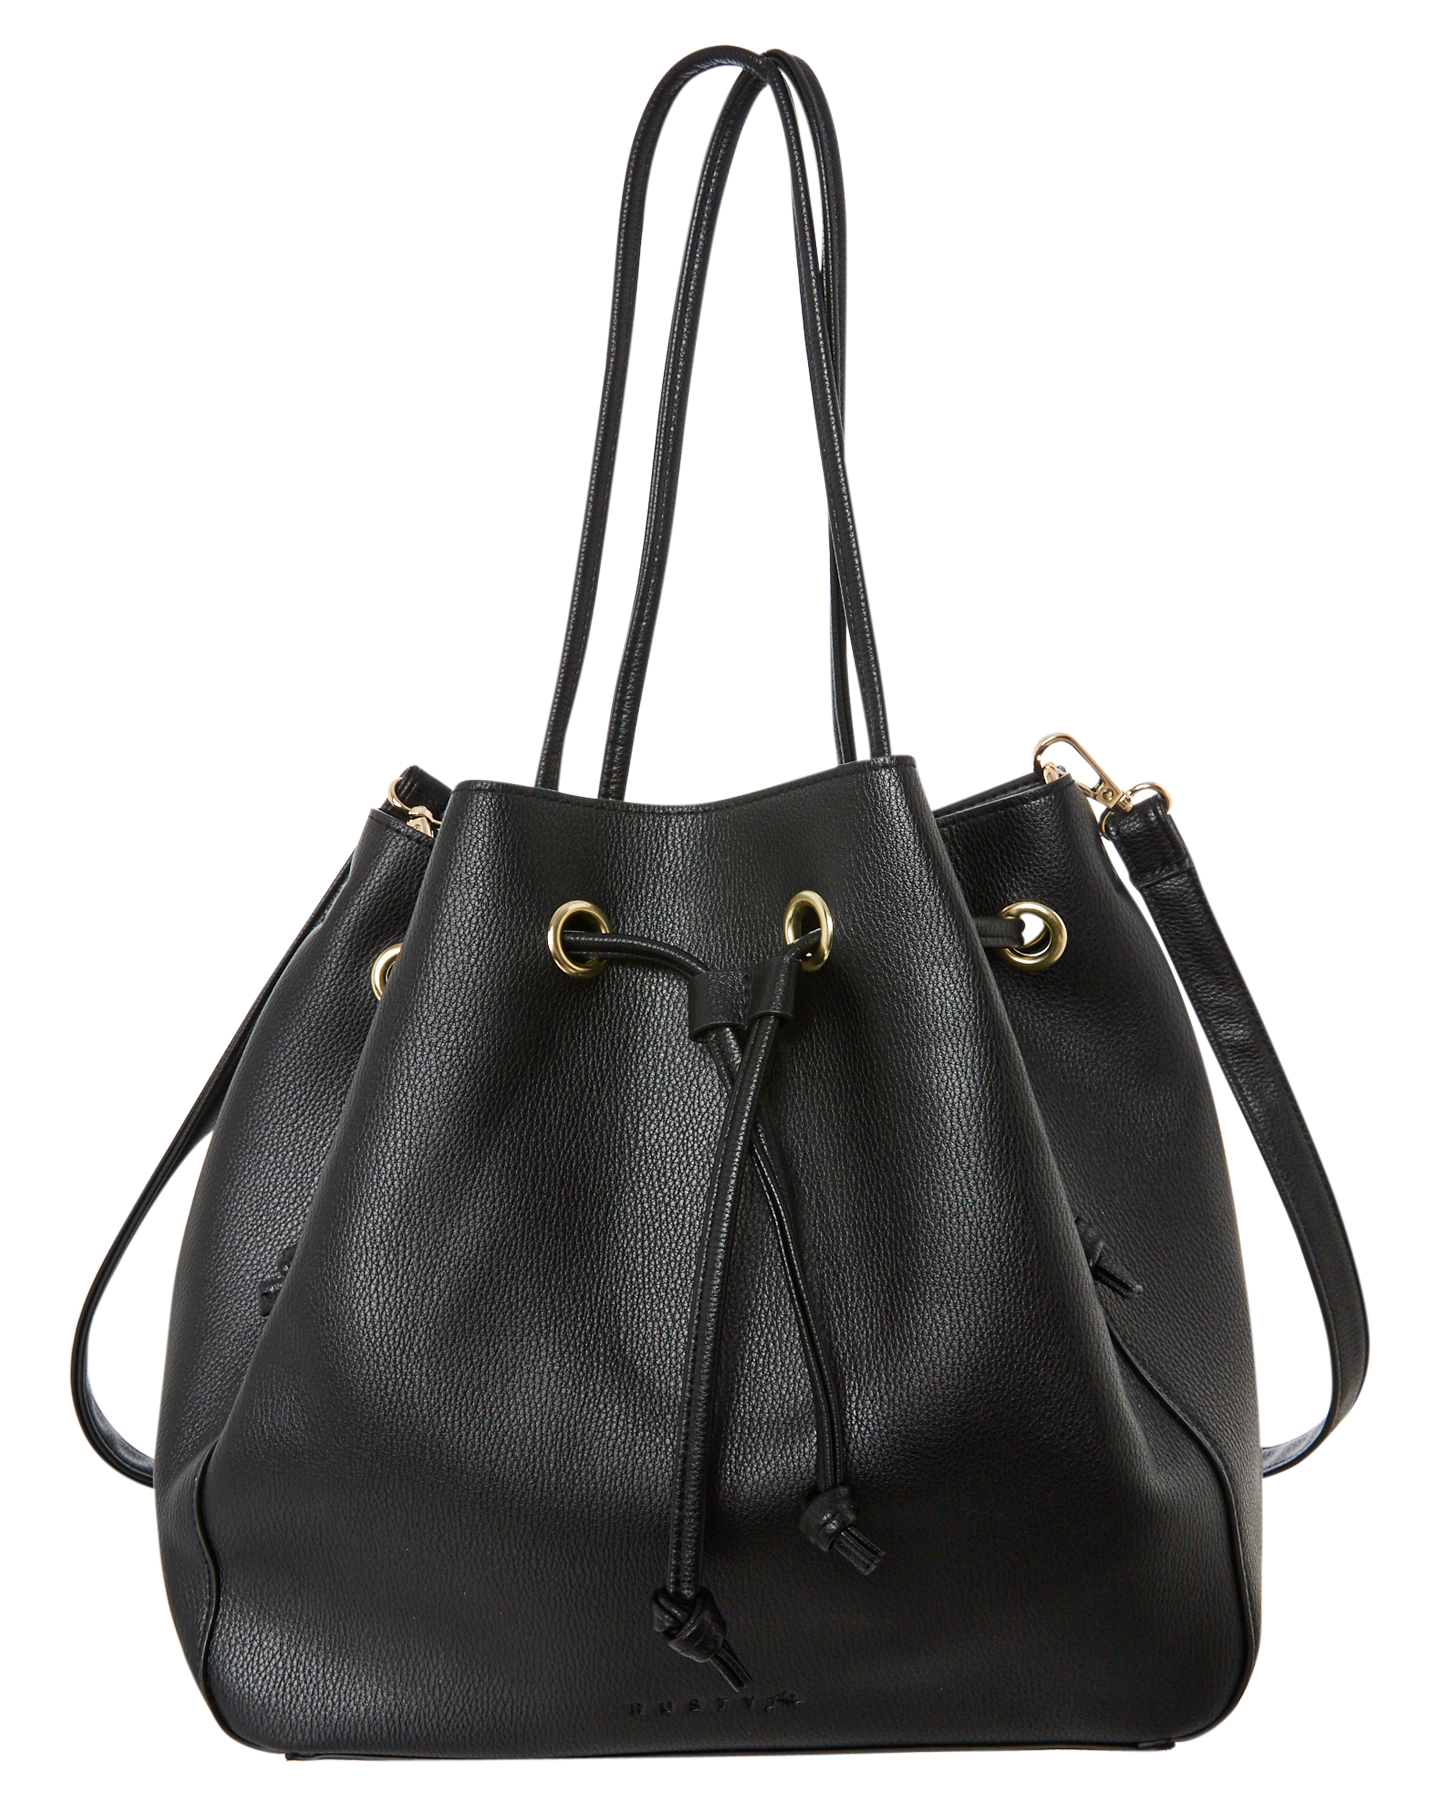 Rusty Revival Tote Bag - Black | SurfStitch